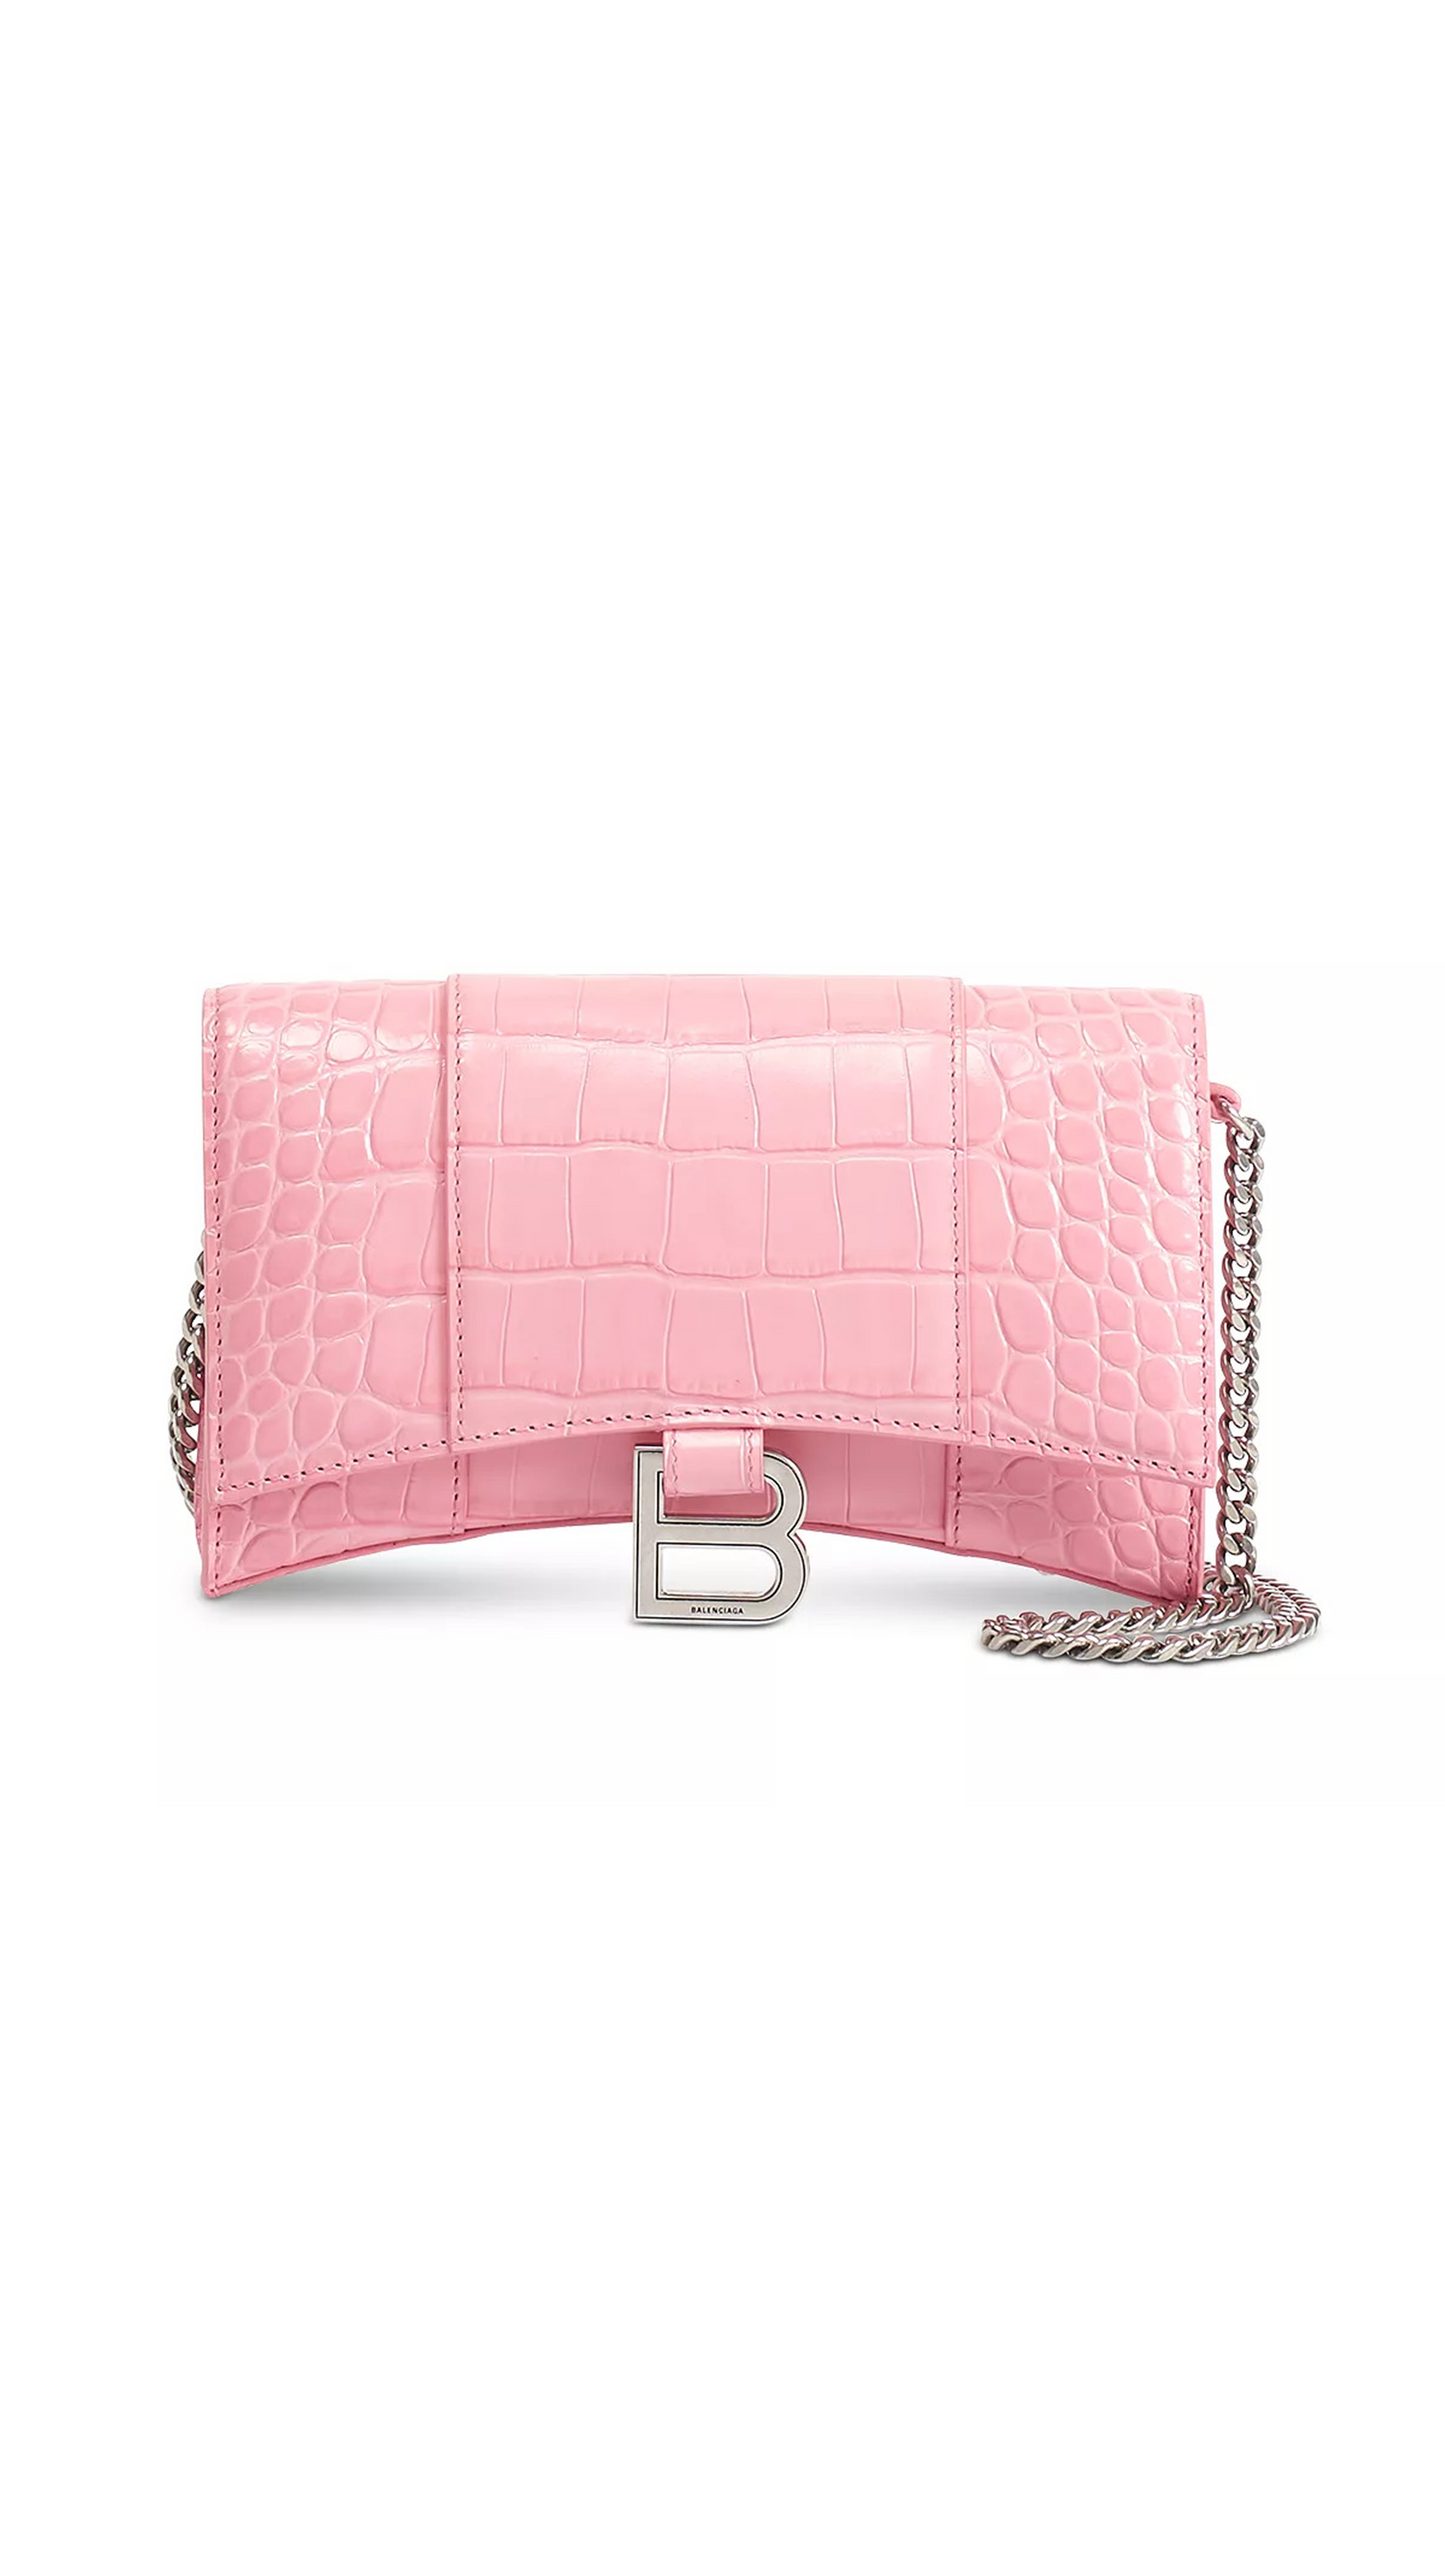 Hourglass Wallet With Chain - Pink